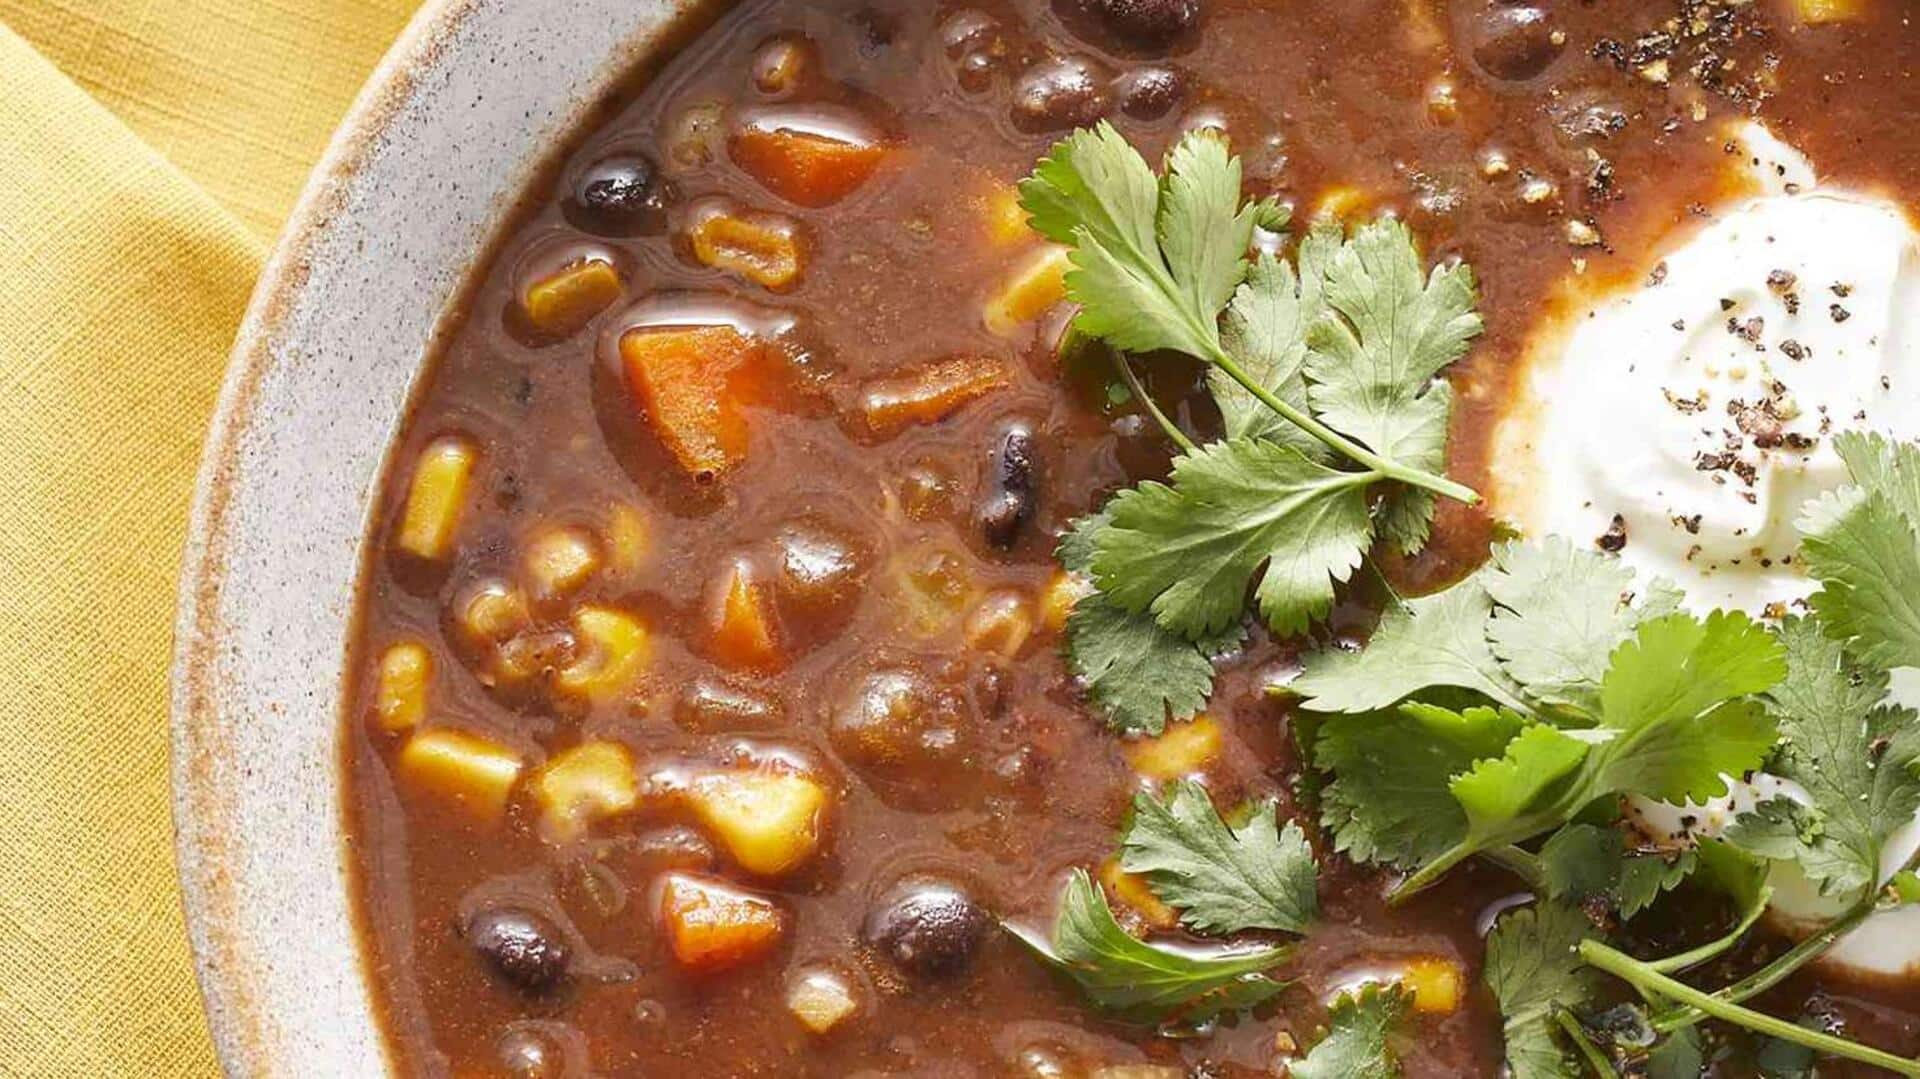 Your guests will love this Cuban black bean soup